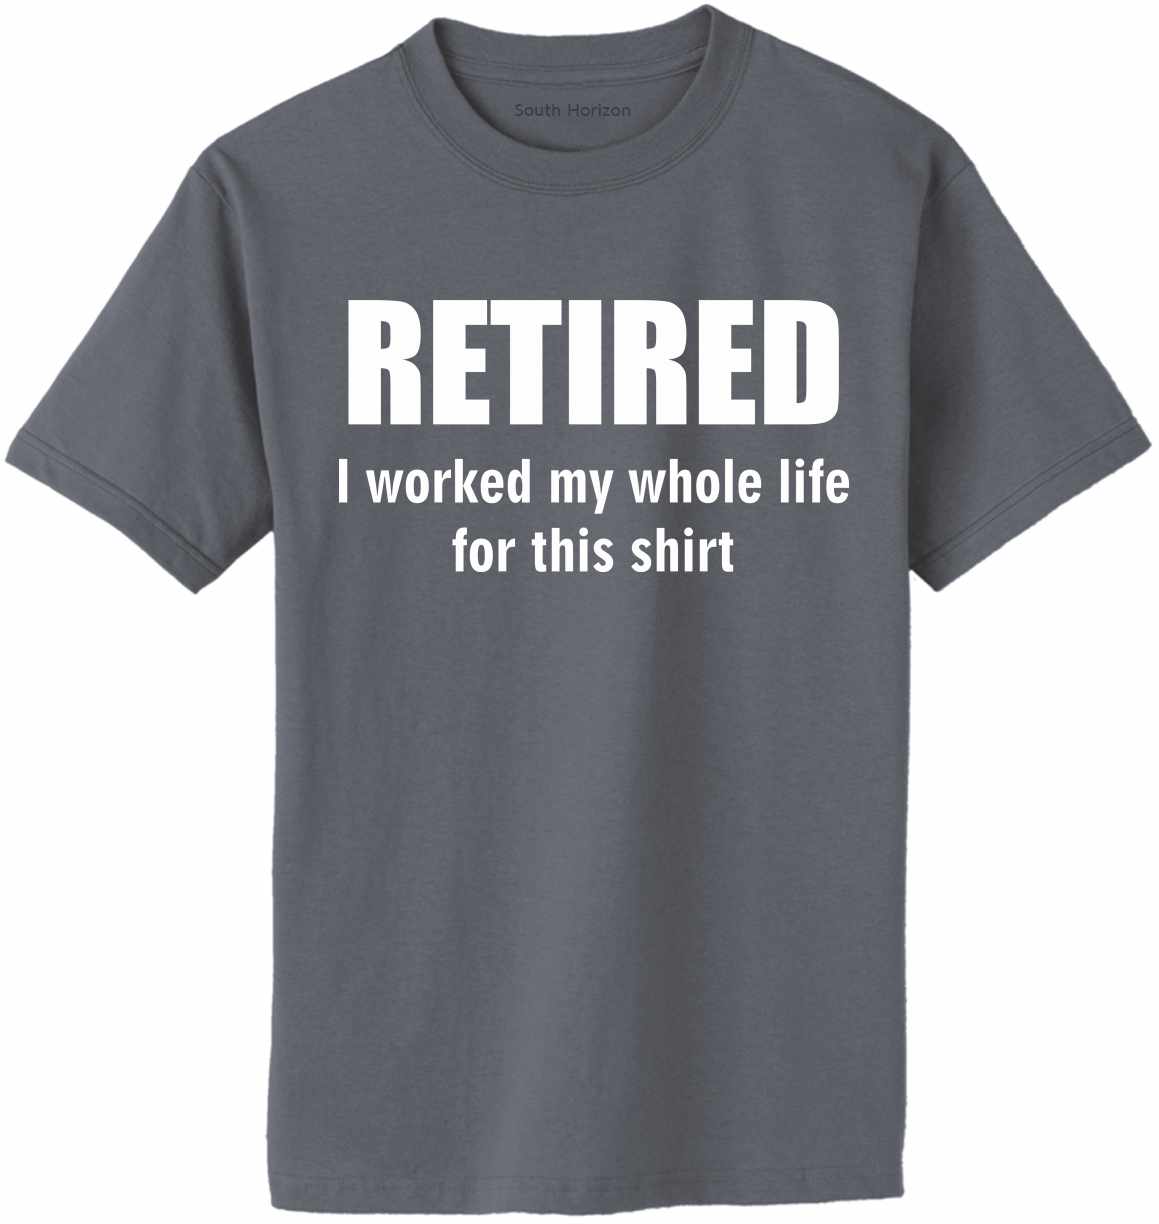 RETIRED, I worked my whole life for this shirt Adult T-Shirt (#920-1)